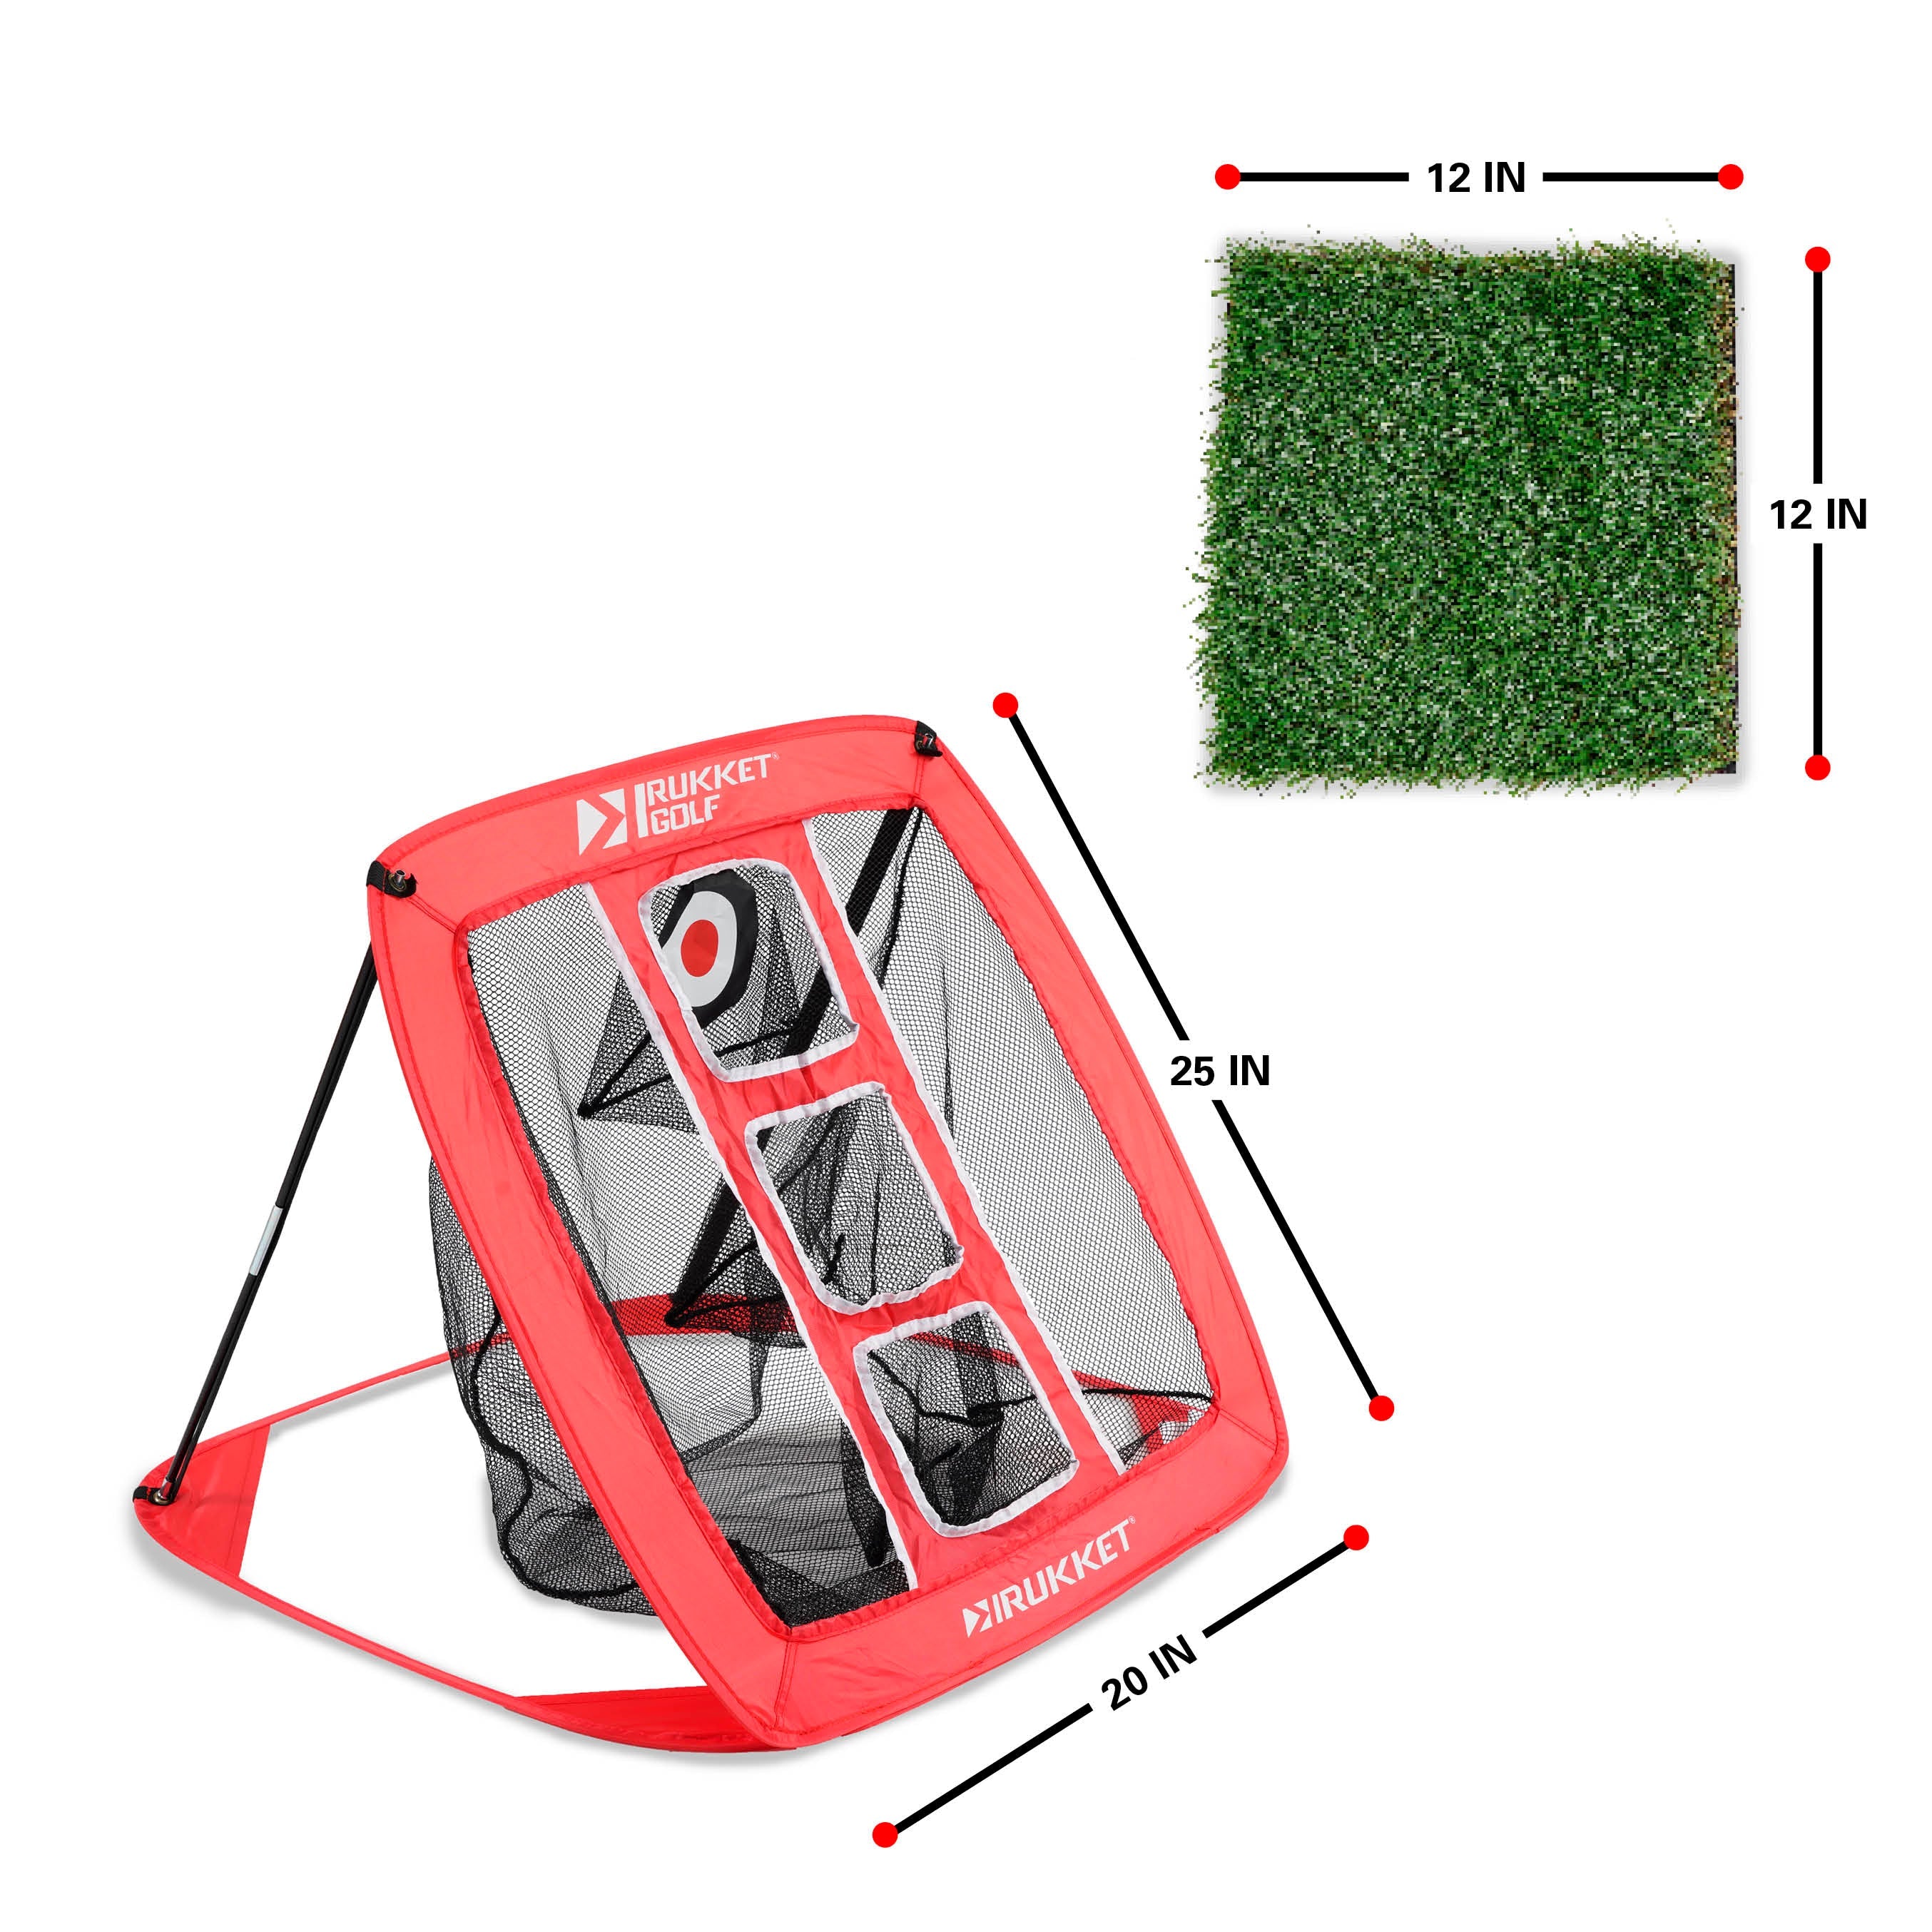 Rukket Sports Haack Chipping Net with Turf Mat & 12 Practice Balls